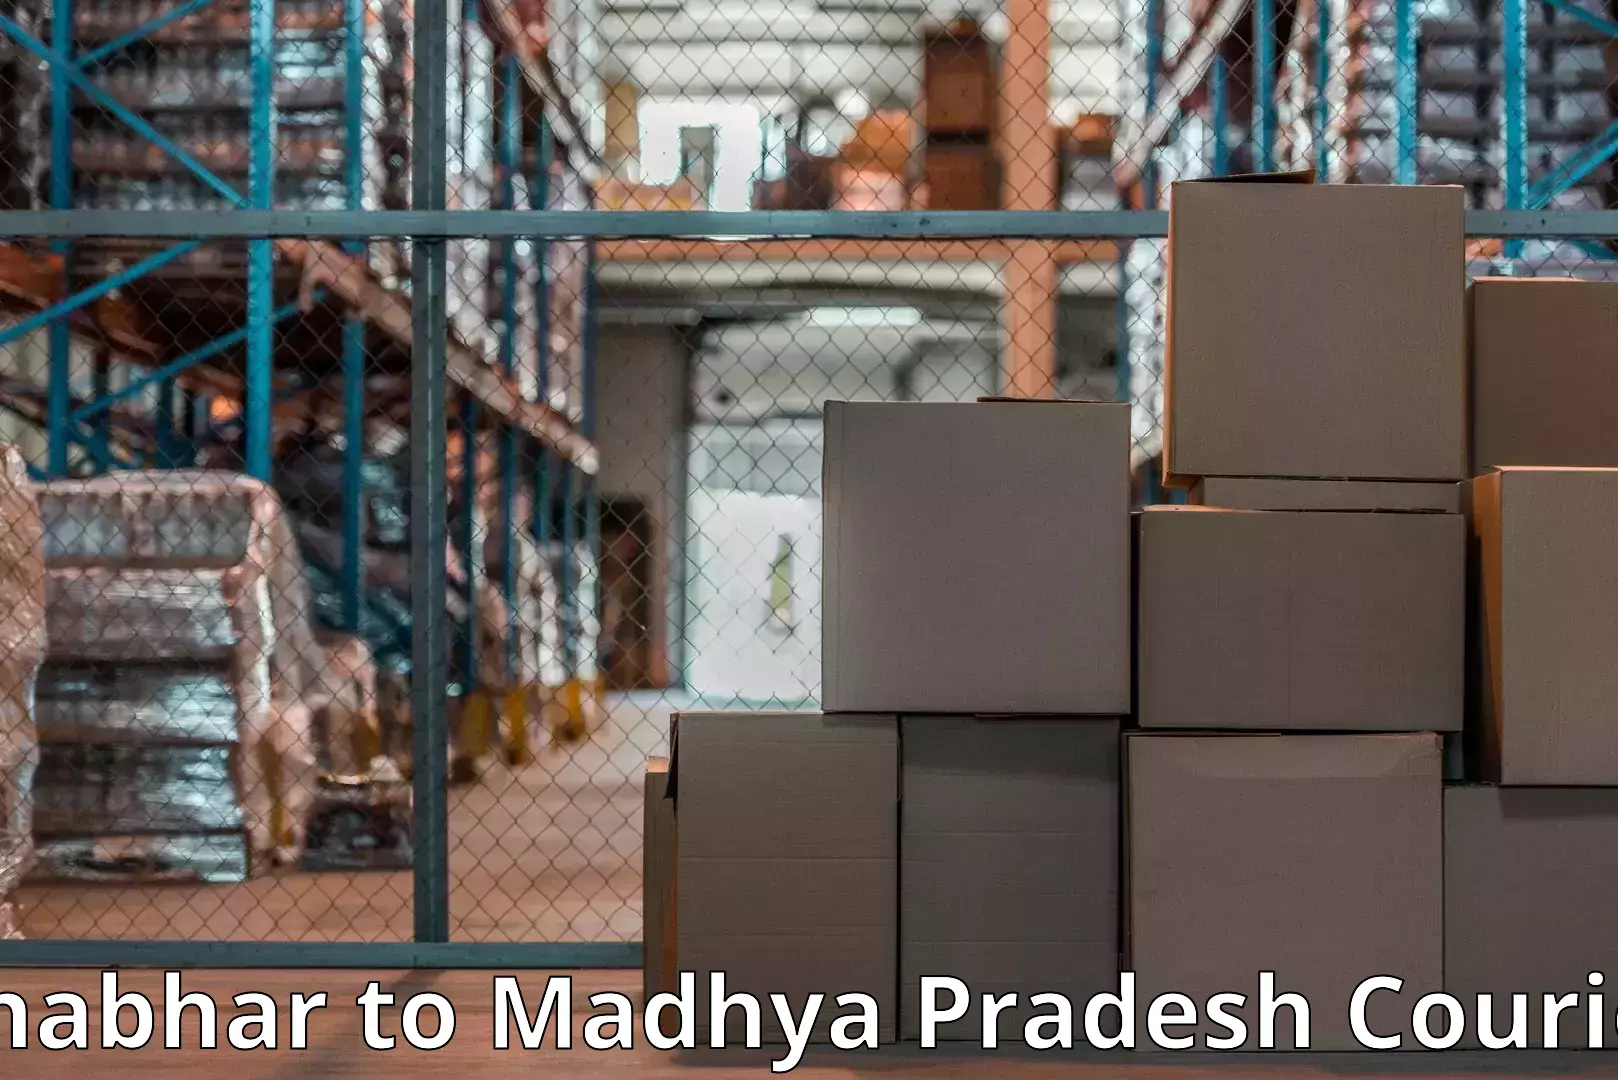 Moving and packing experts Bhabhar to Mandideep